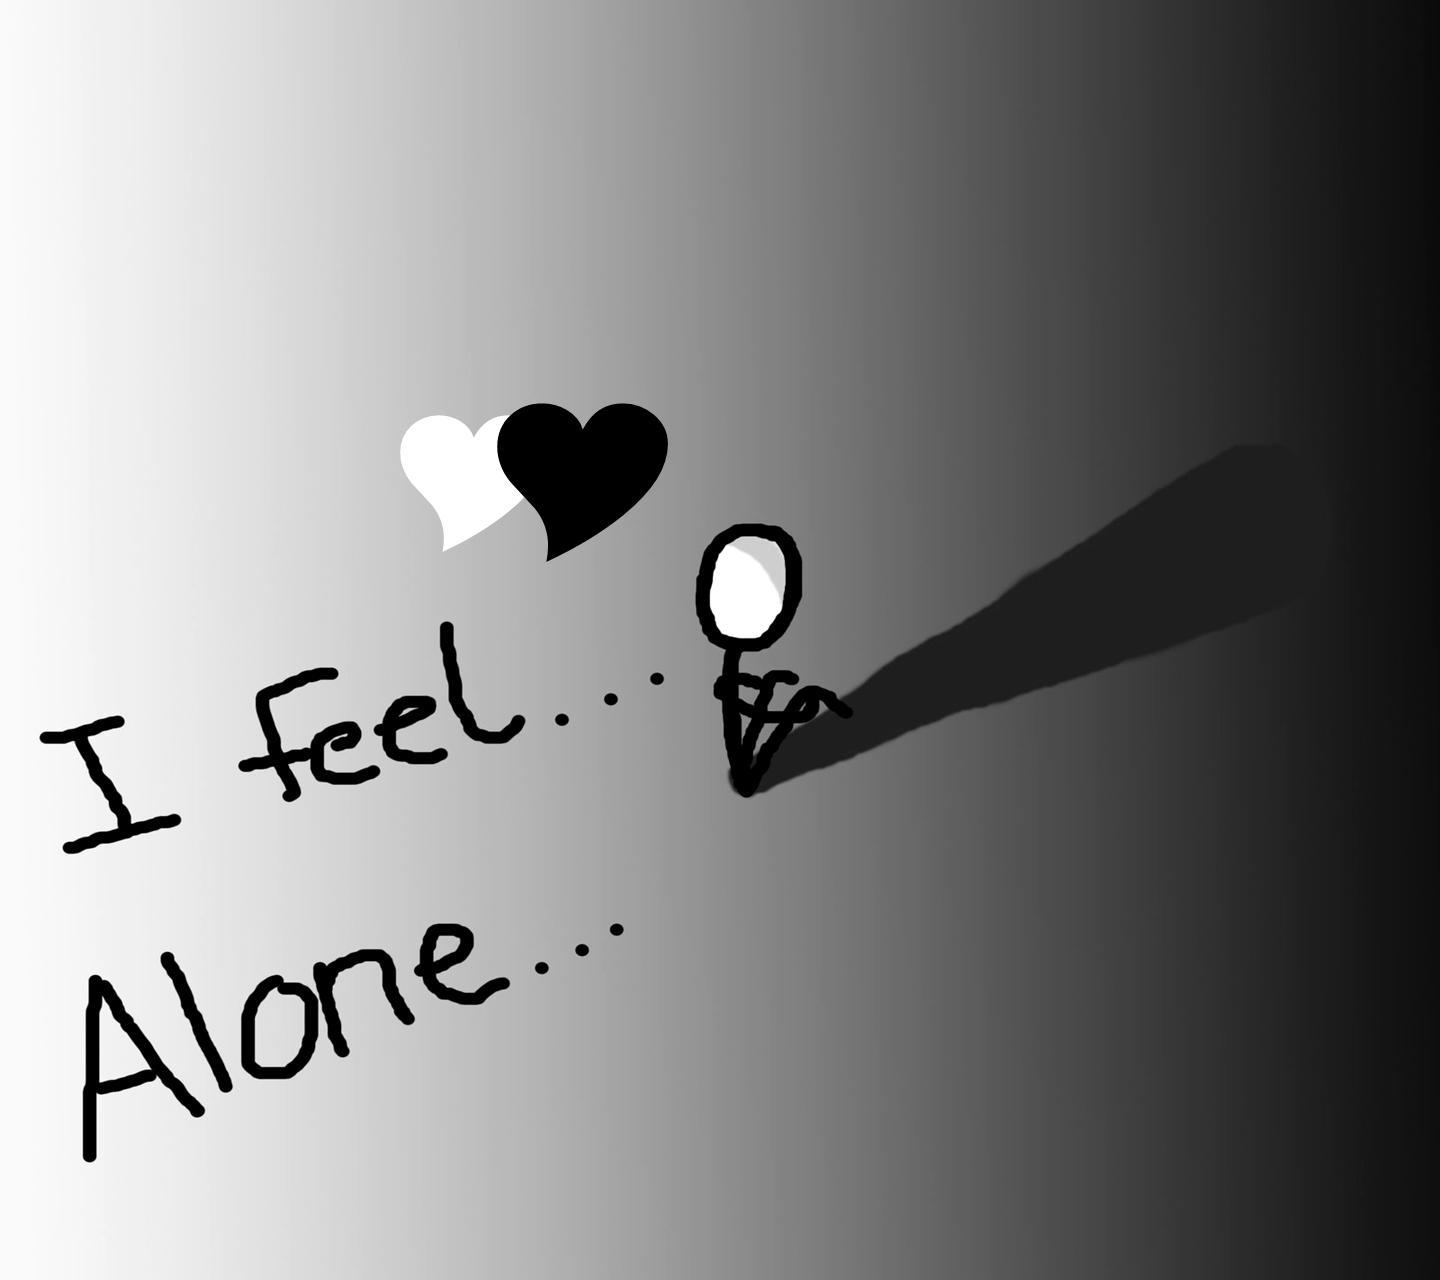 Sad alone quotes with wallpaper and image HD 1440x1280